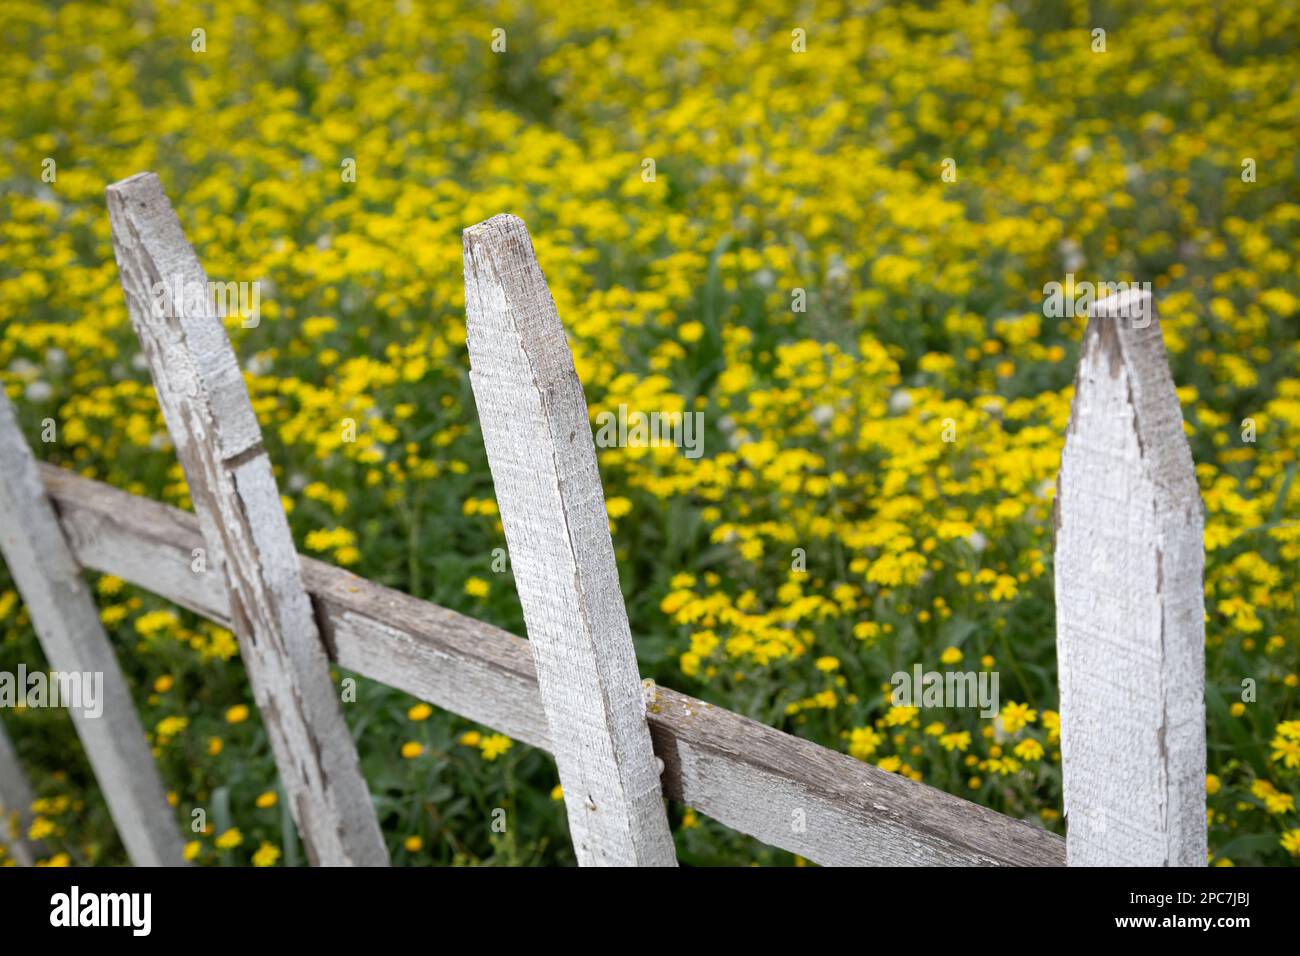 Yellow spring flowers behind white painted wooden fence. White wooden fences in selective focus. Nature, gardening, flower concept. Stock Photo